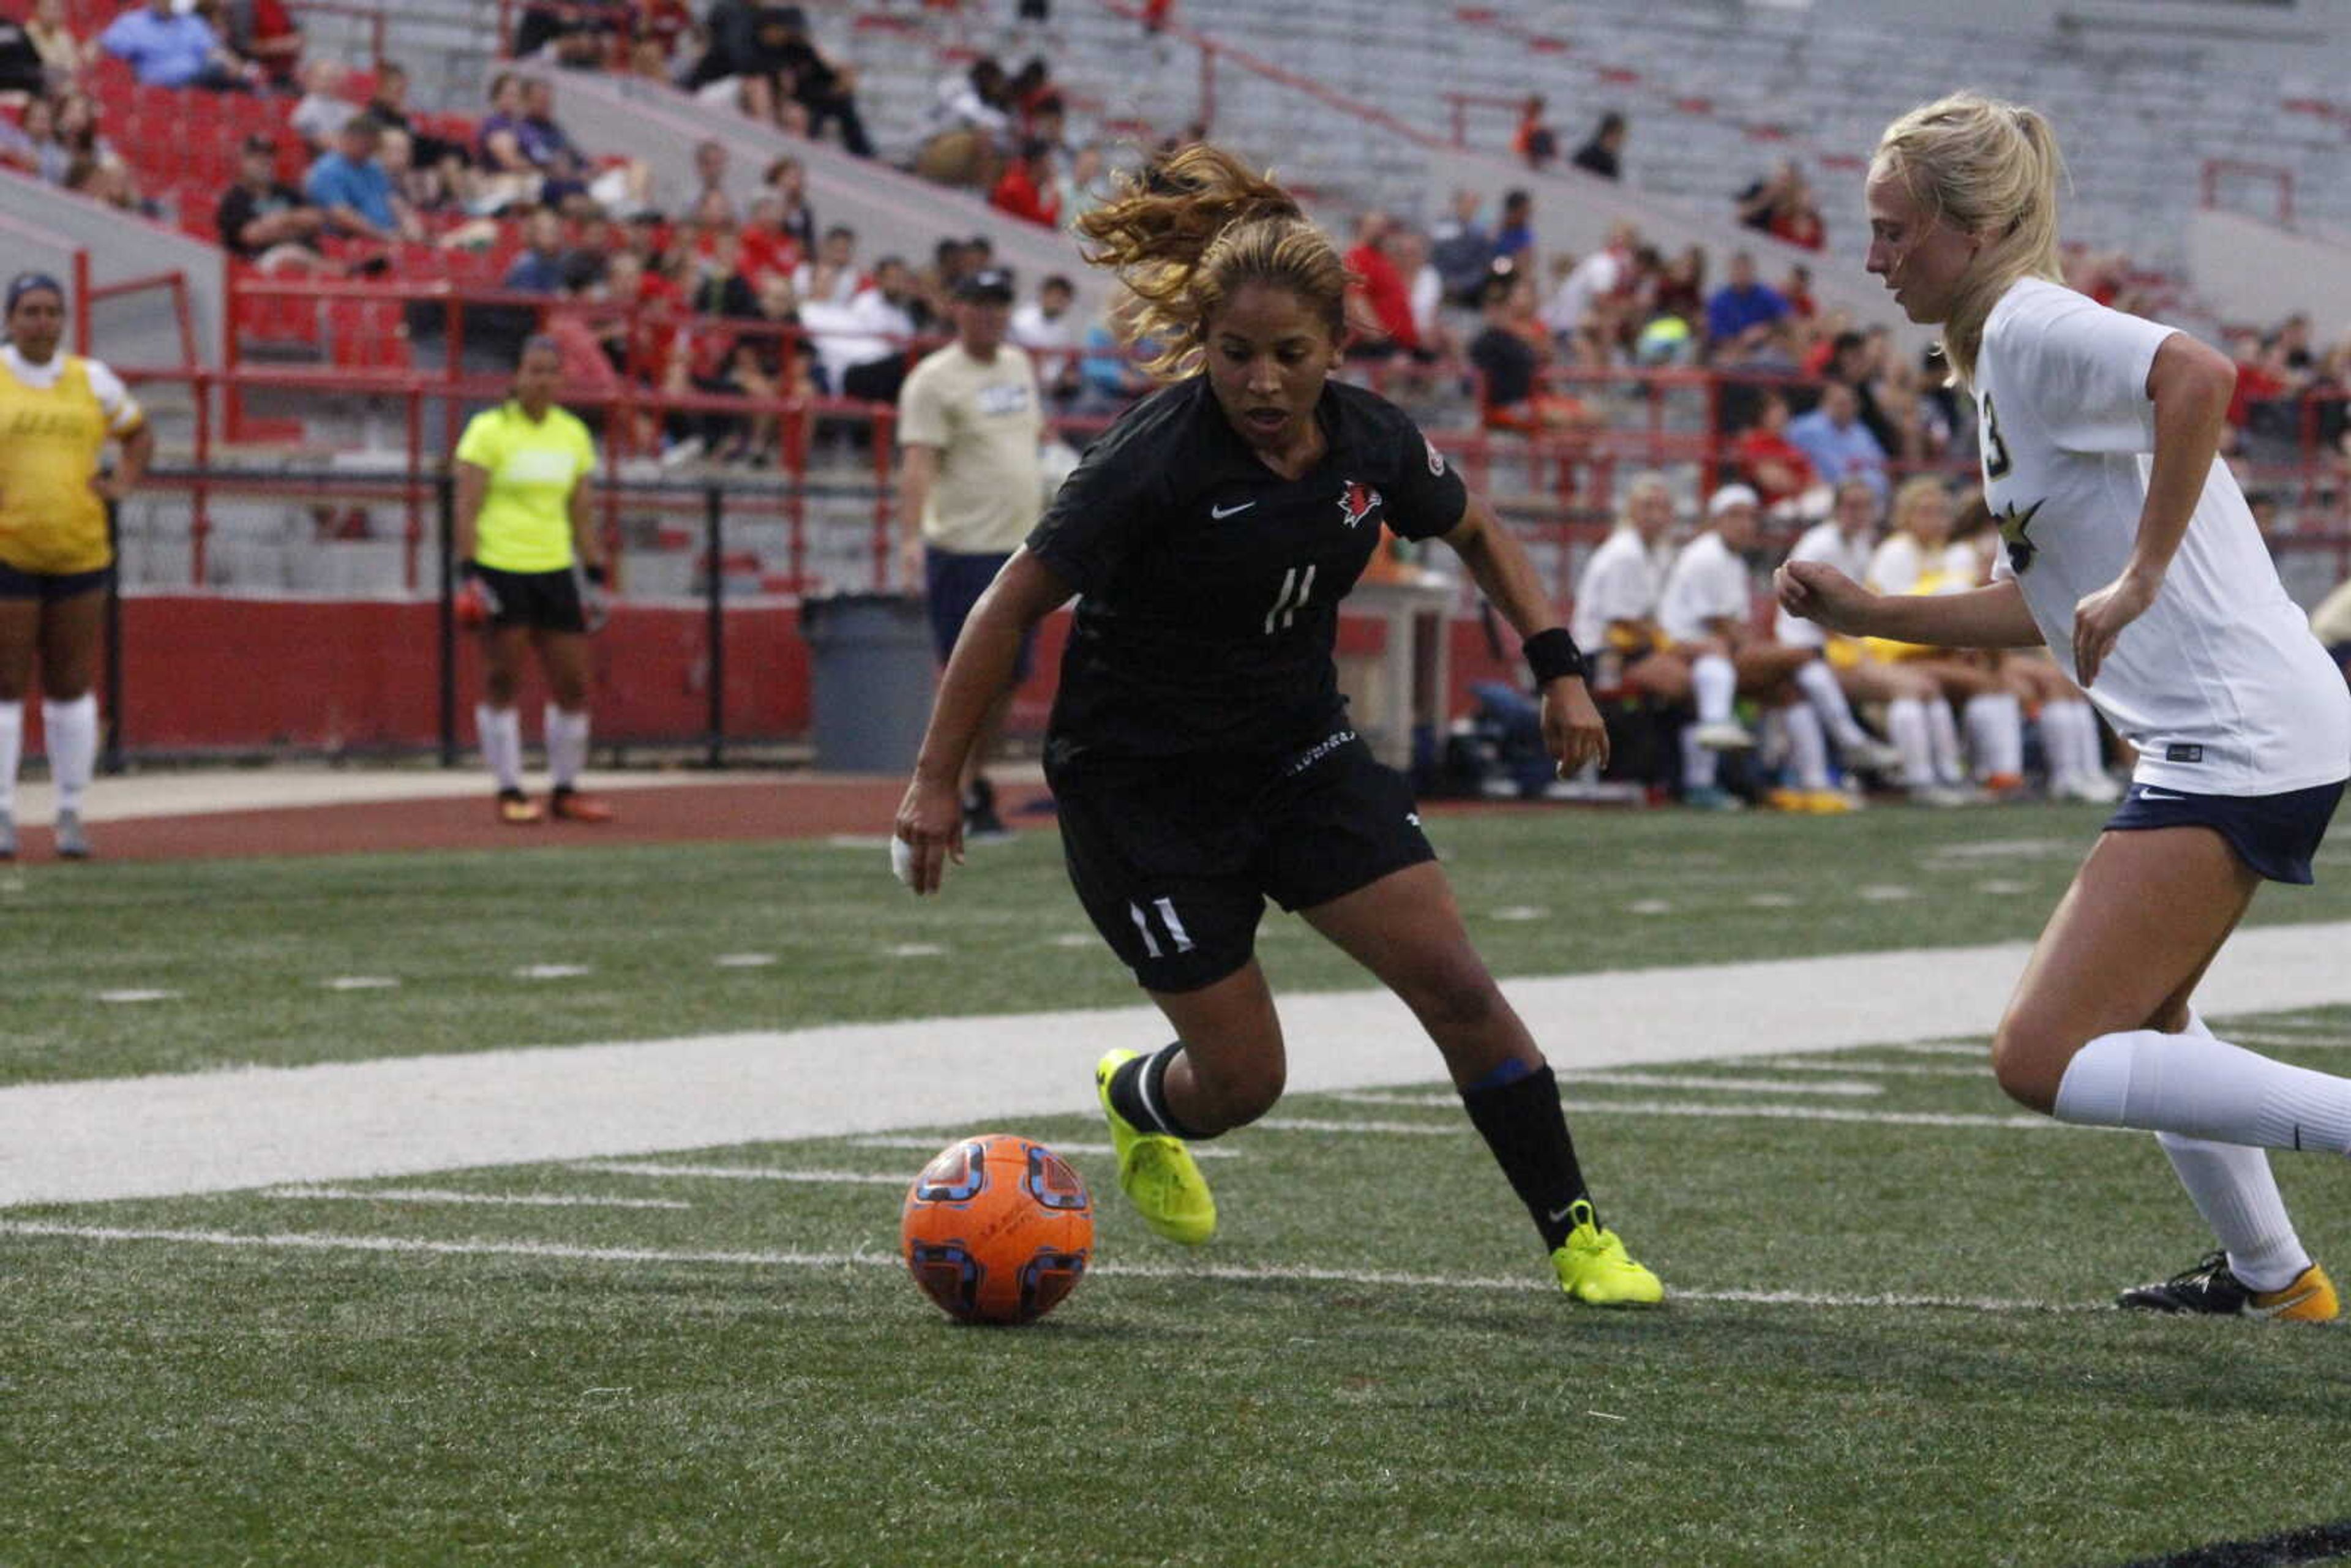 Junior midfielder Esmie Gonzales pushes the ball upfield in a match against the University of Illinois-Springfield on Aug. 24.